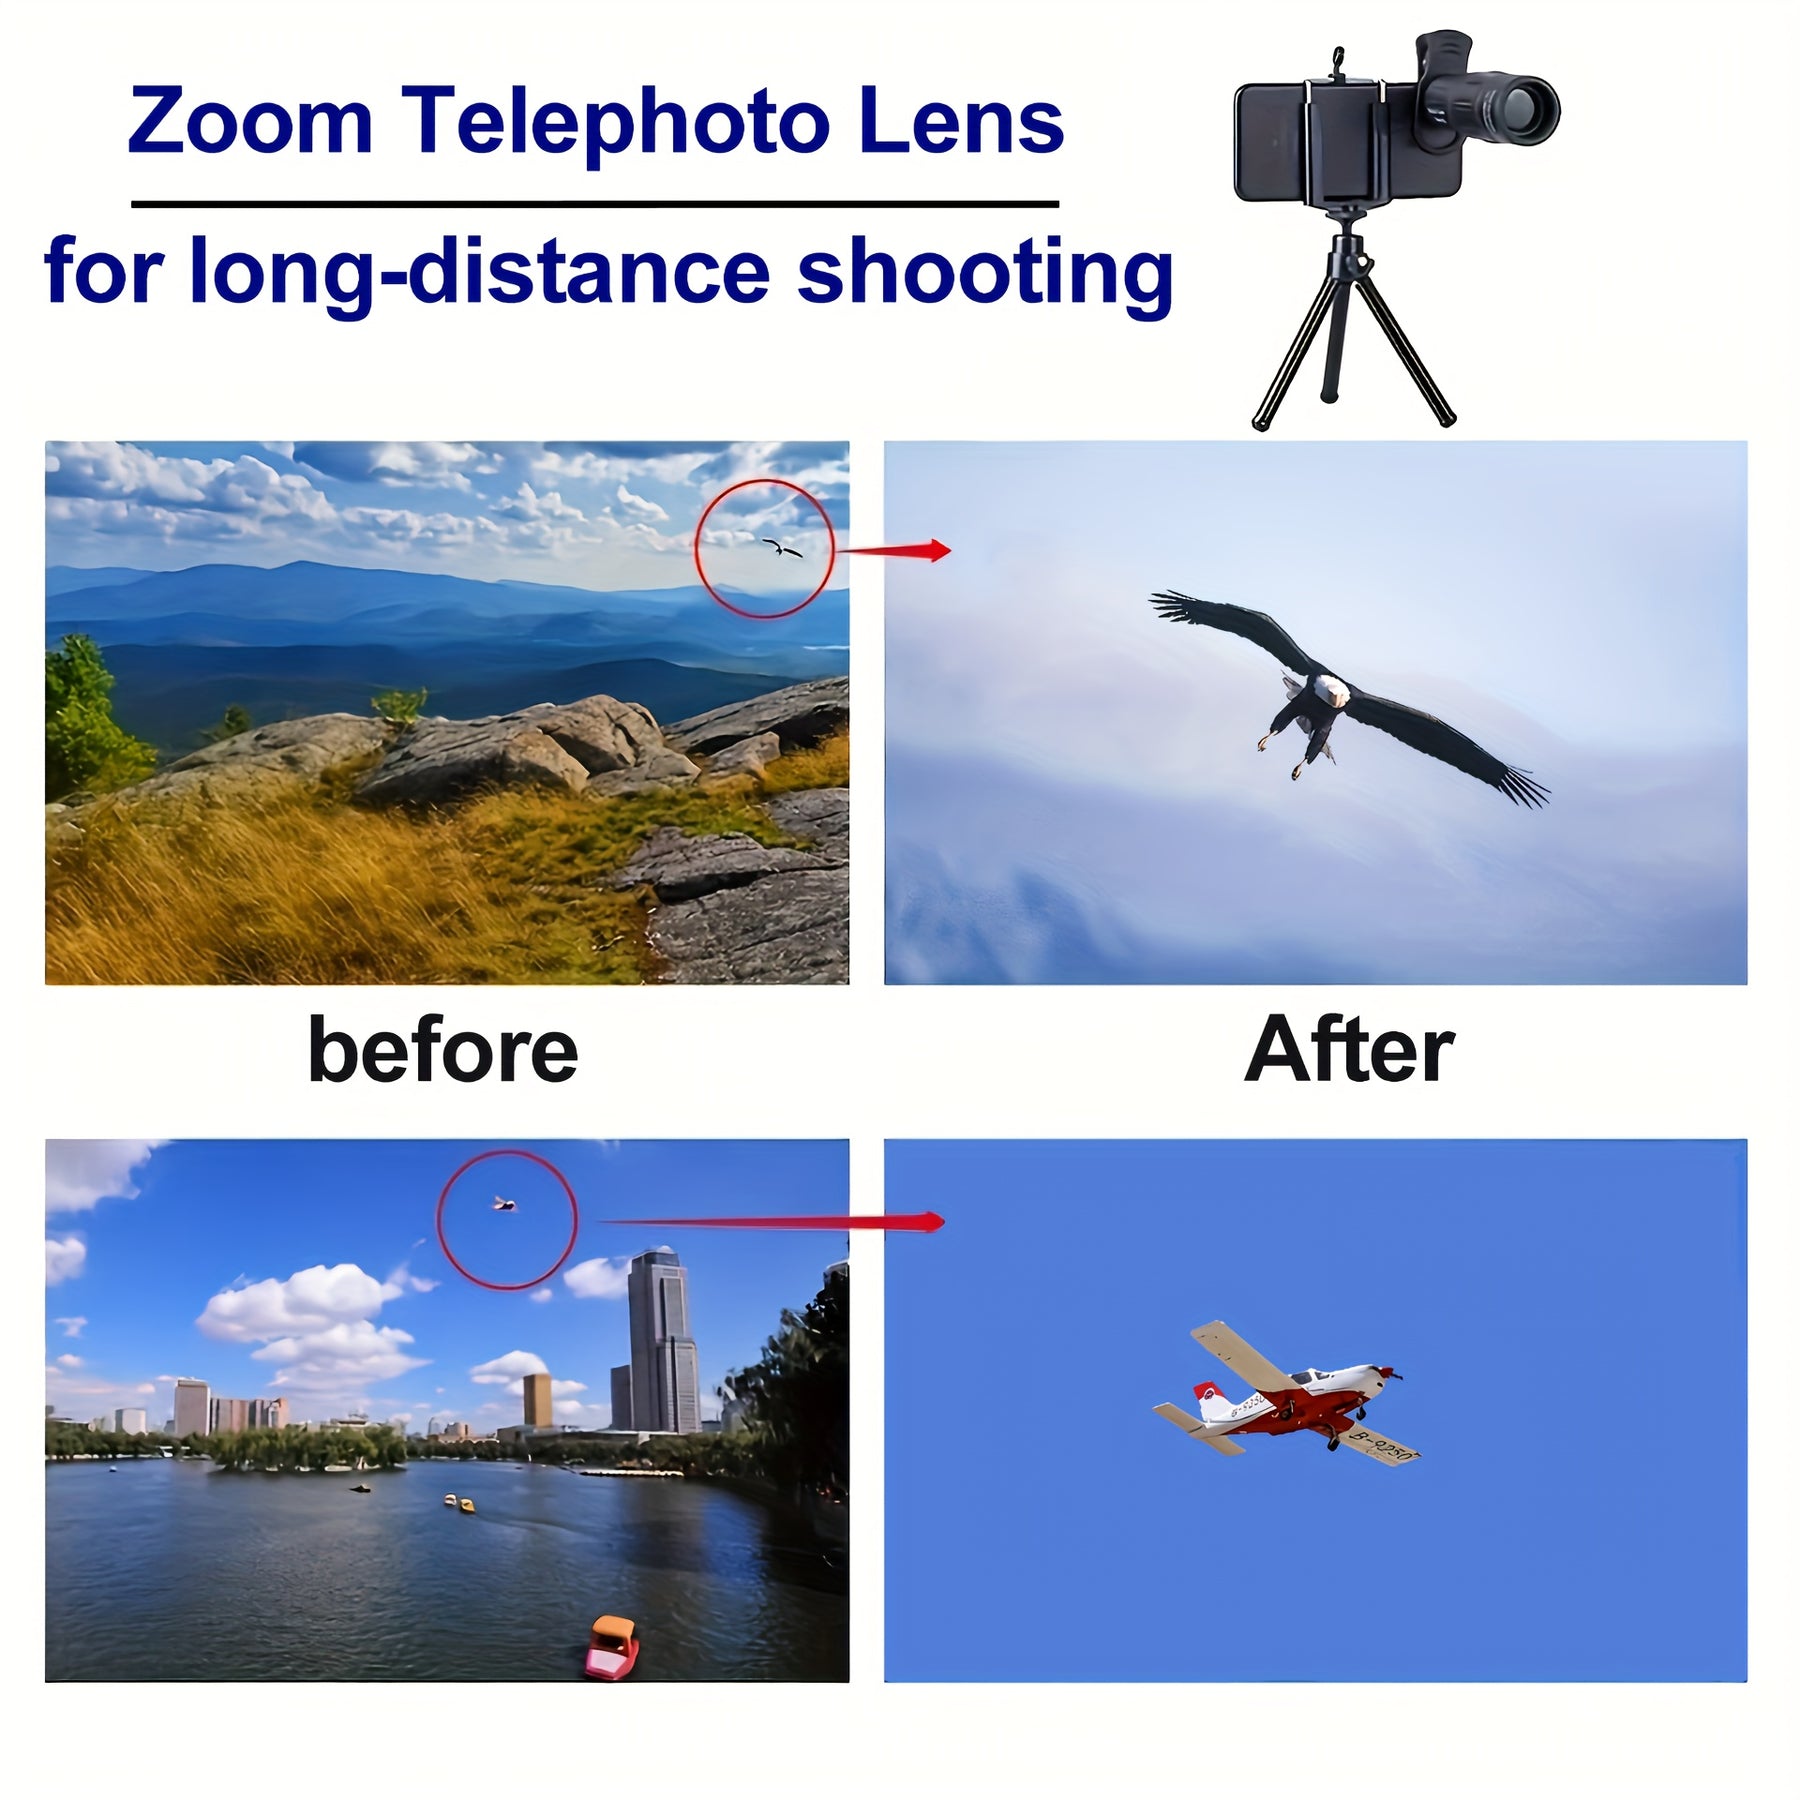 Universal Cell Phone External Telephoto Lens, 18 Times Optical Zoom Lens, With Tripod Stabilized